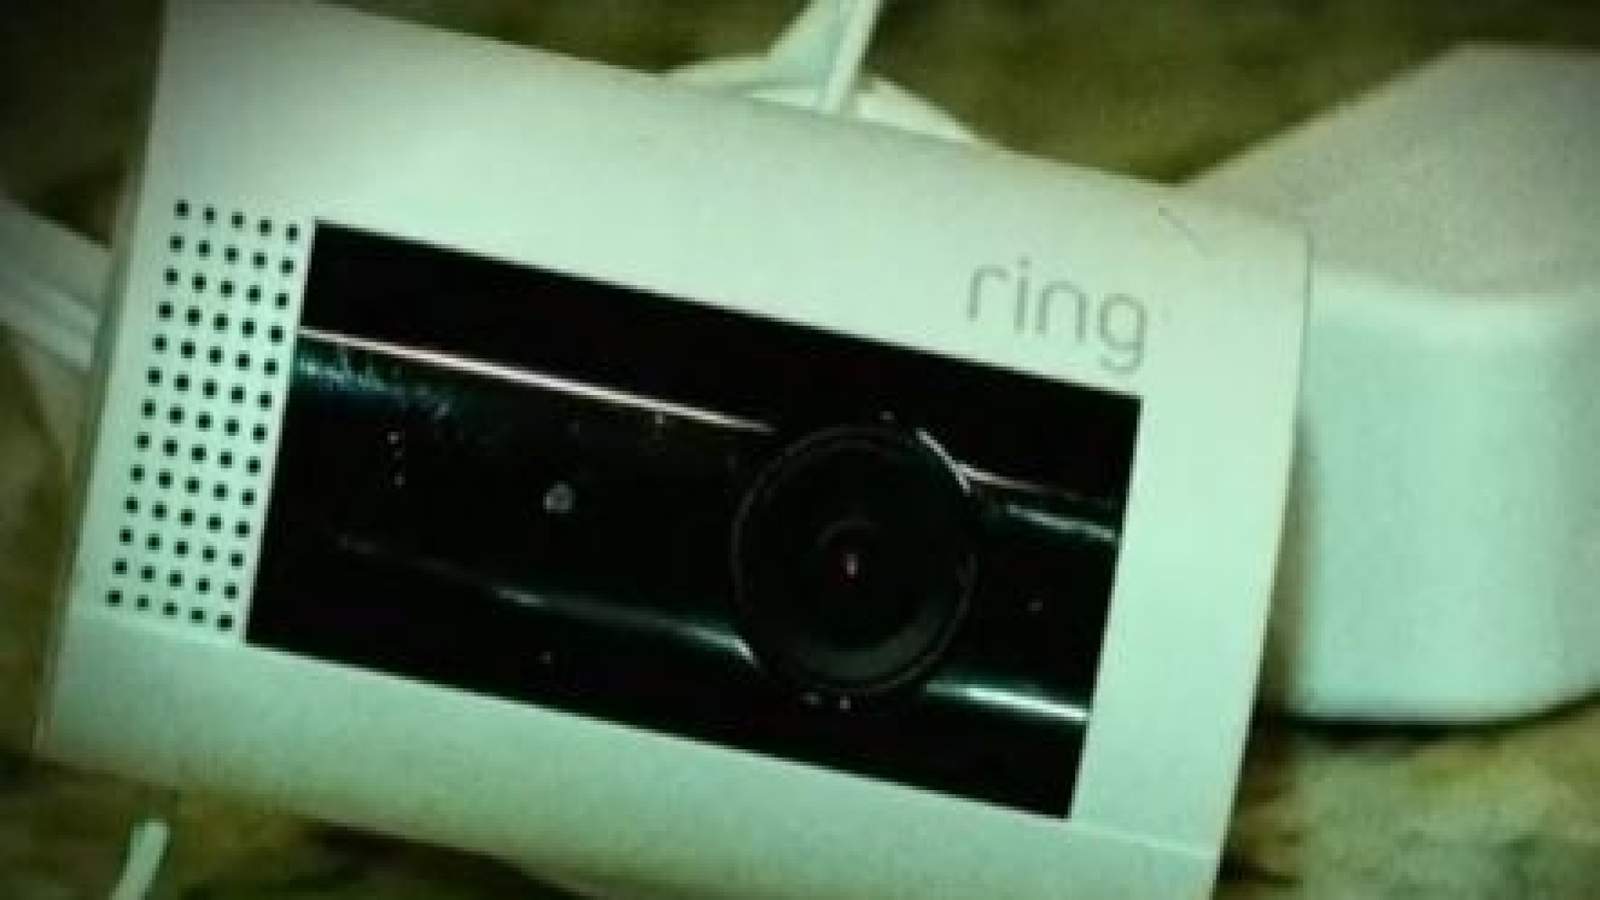 Here are the video doorbells that put you and your family at risk